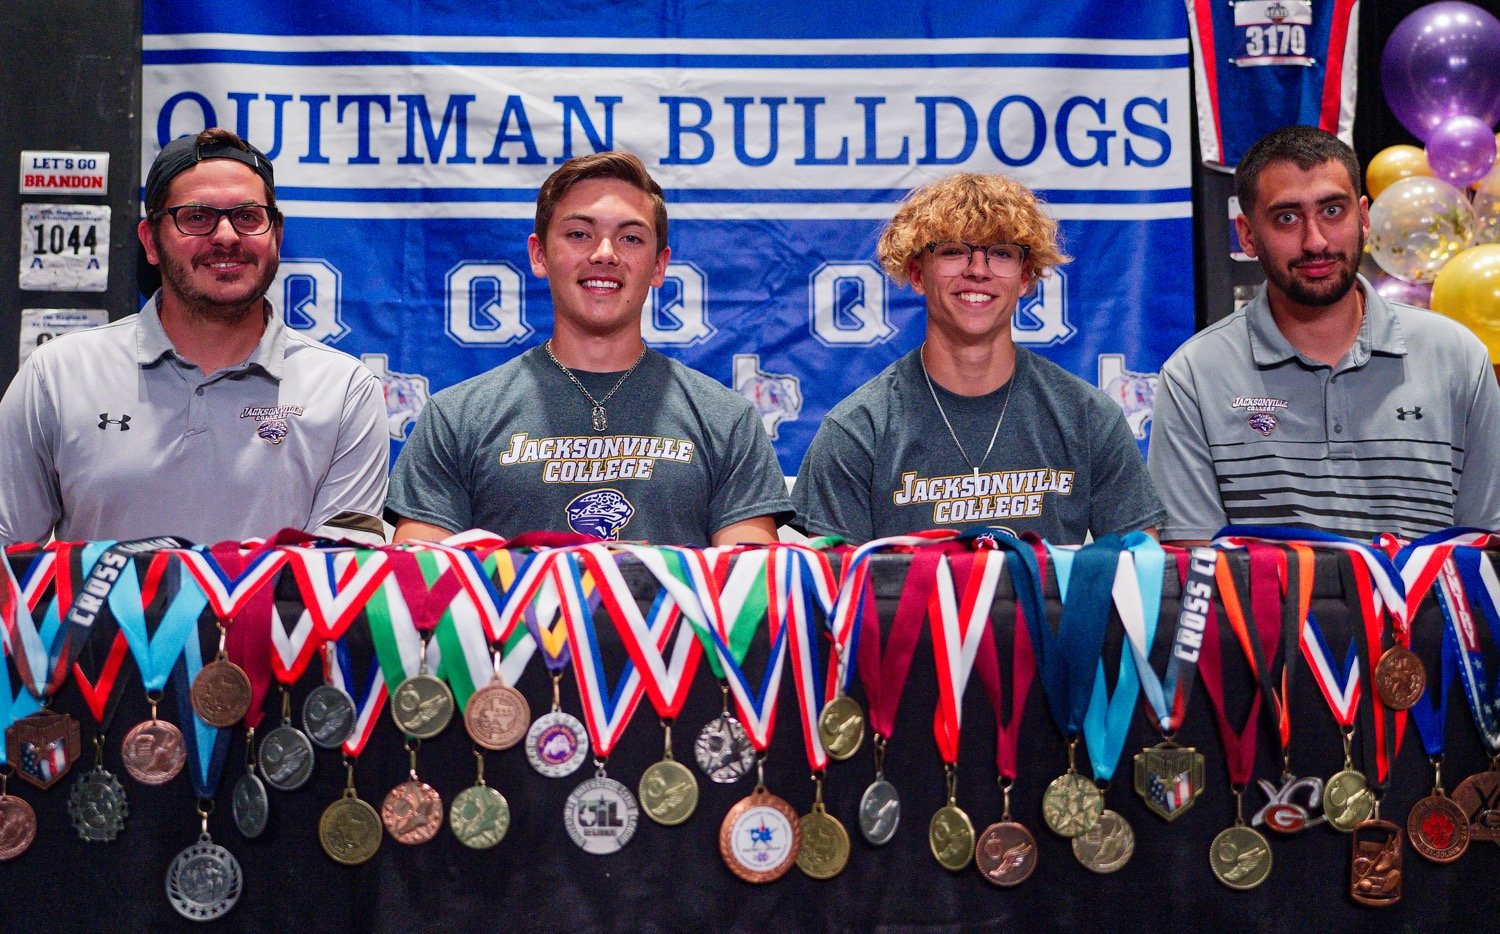 Jacksonville College athletic director and head track coach Kirby Shepherd, left, with Brandon Jimenez and Jack Tannebaum of Quitman and assistant Coach Jacob Rowland, a Quitman grad. [see more signing celebrations]